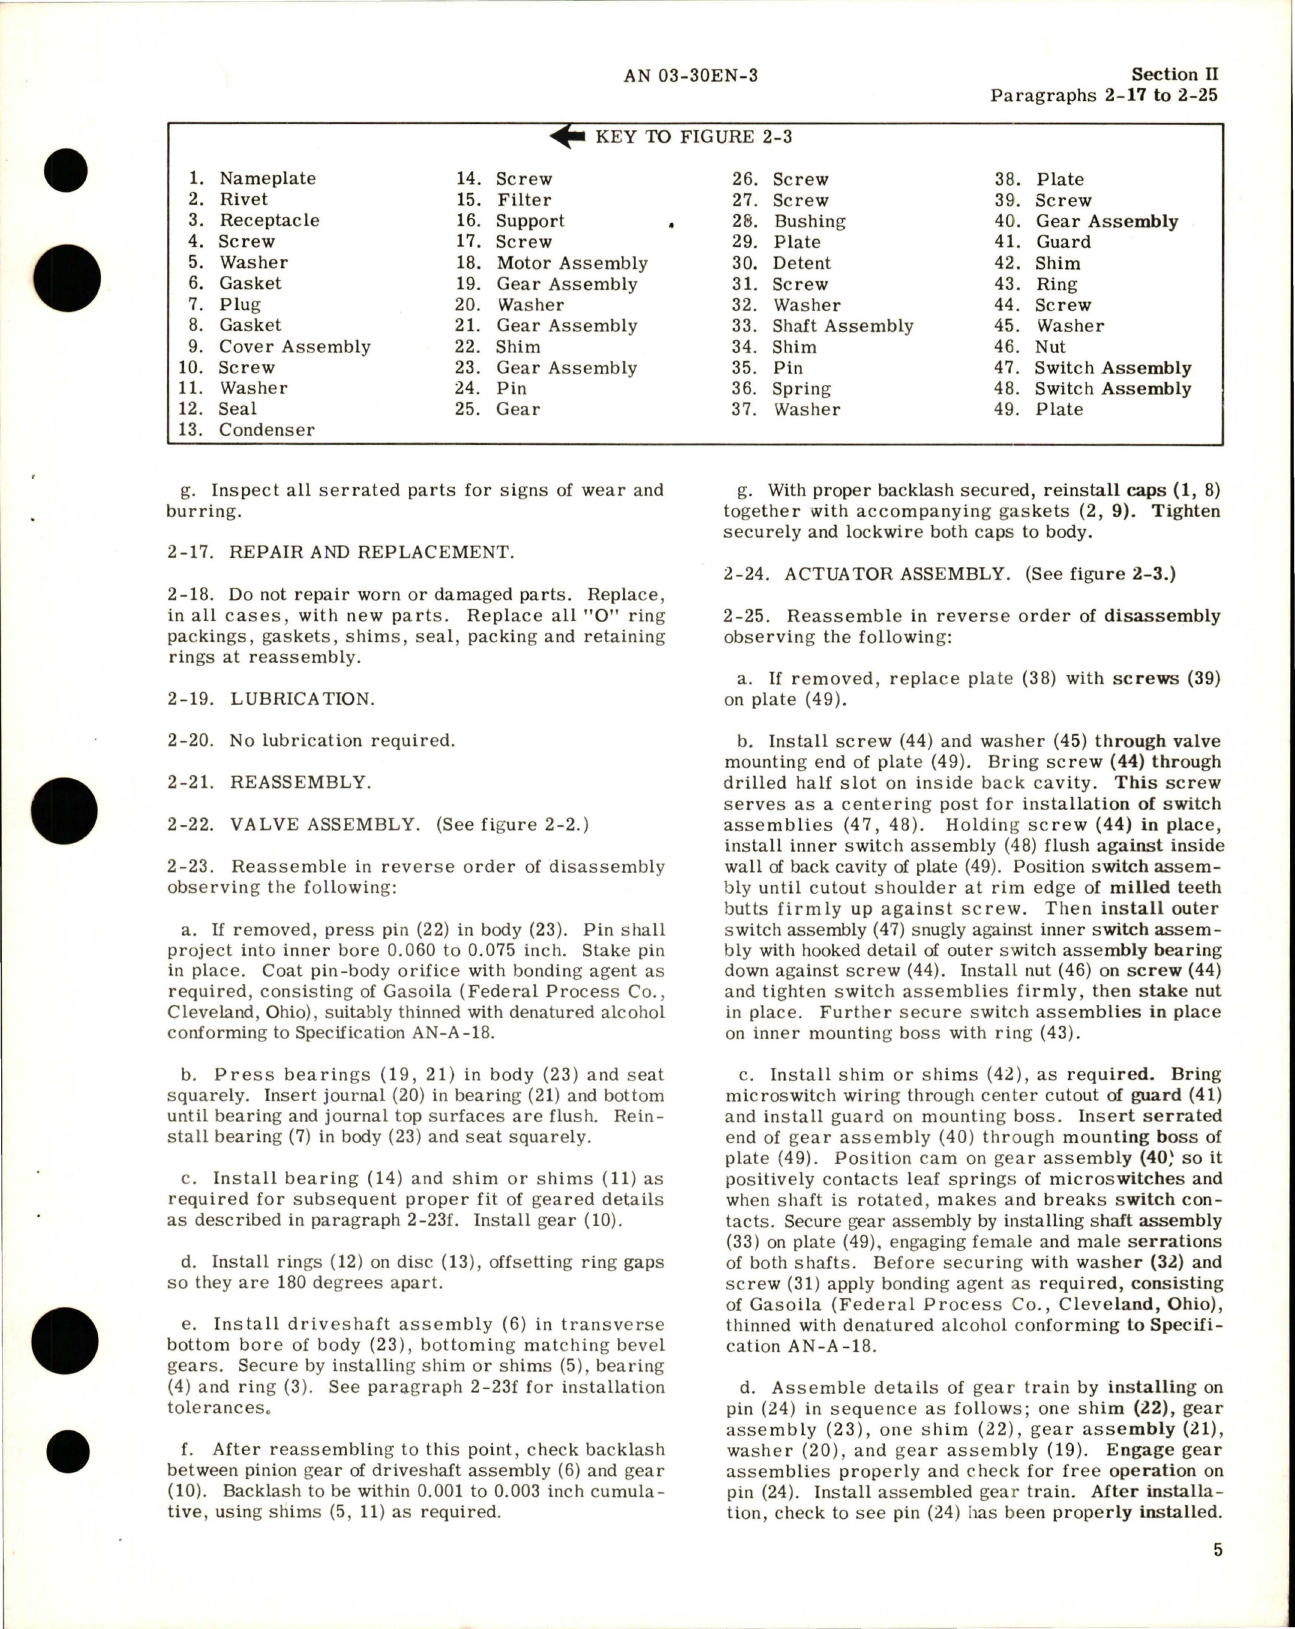 Sample page 9 from AirCorps Library document: Overhaul Instructions for Hot Air Shutoff Valve - Parts PAC 2274, PAC 2275, PAC 2279, PAC 2279-1, and PAC 3022 